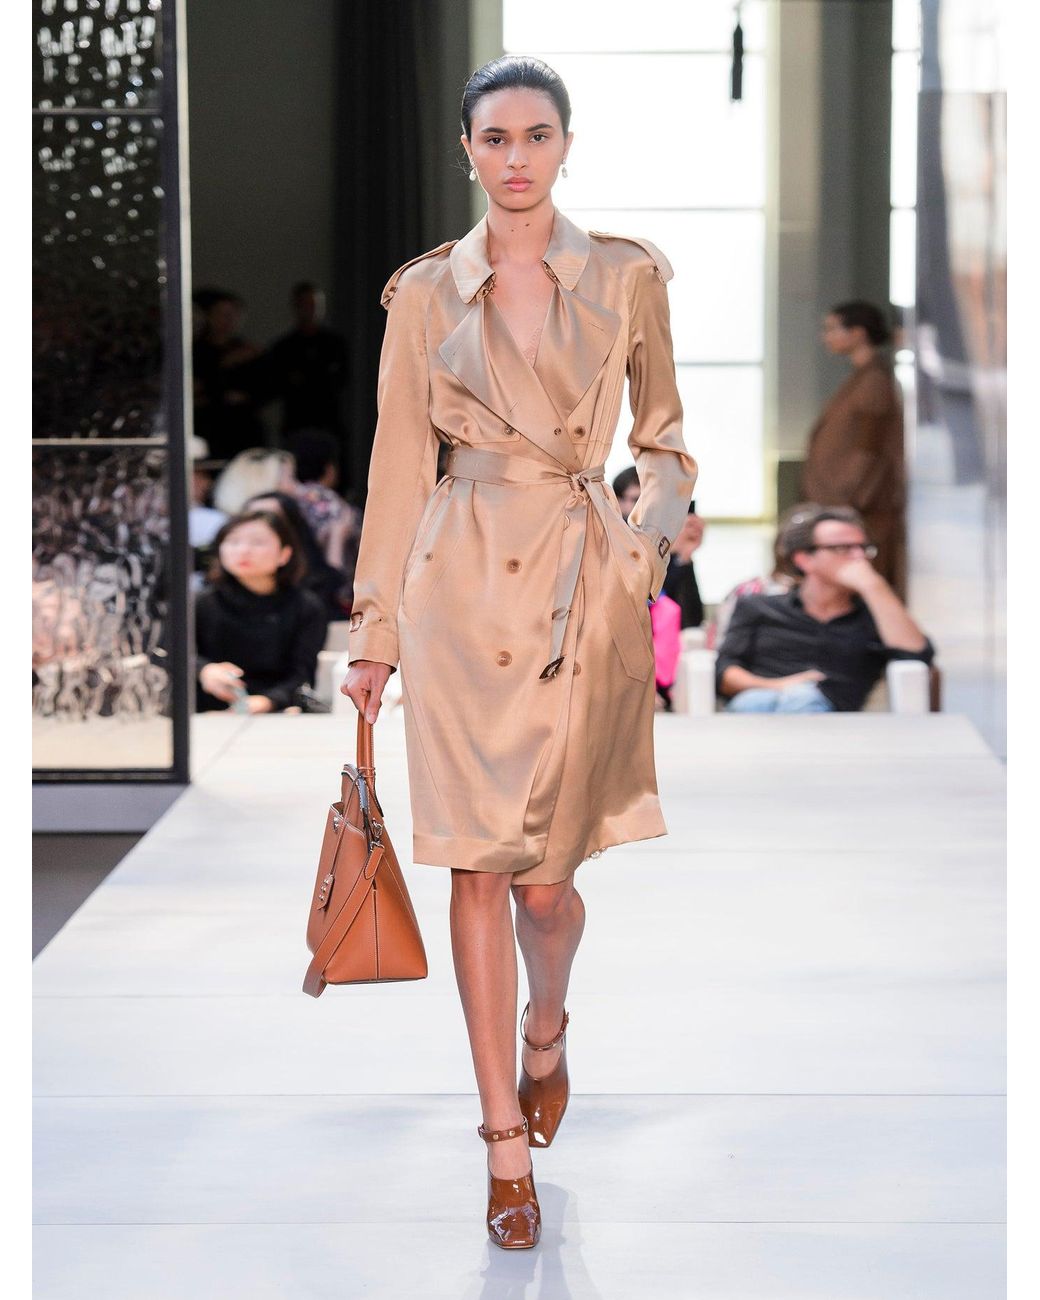 Burberry Double-breasted Silk-satin Trench Coat in Beige (Natural) | Lyst